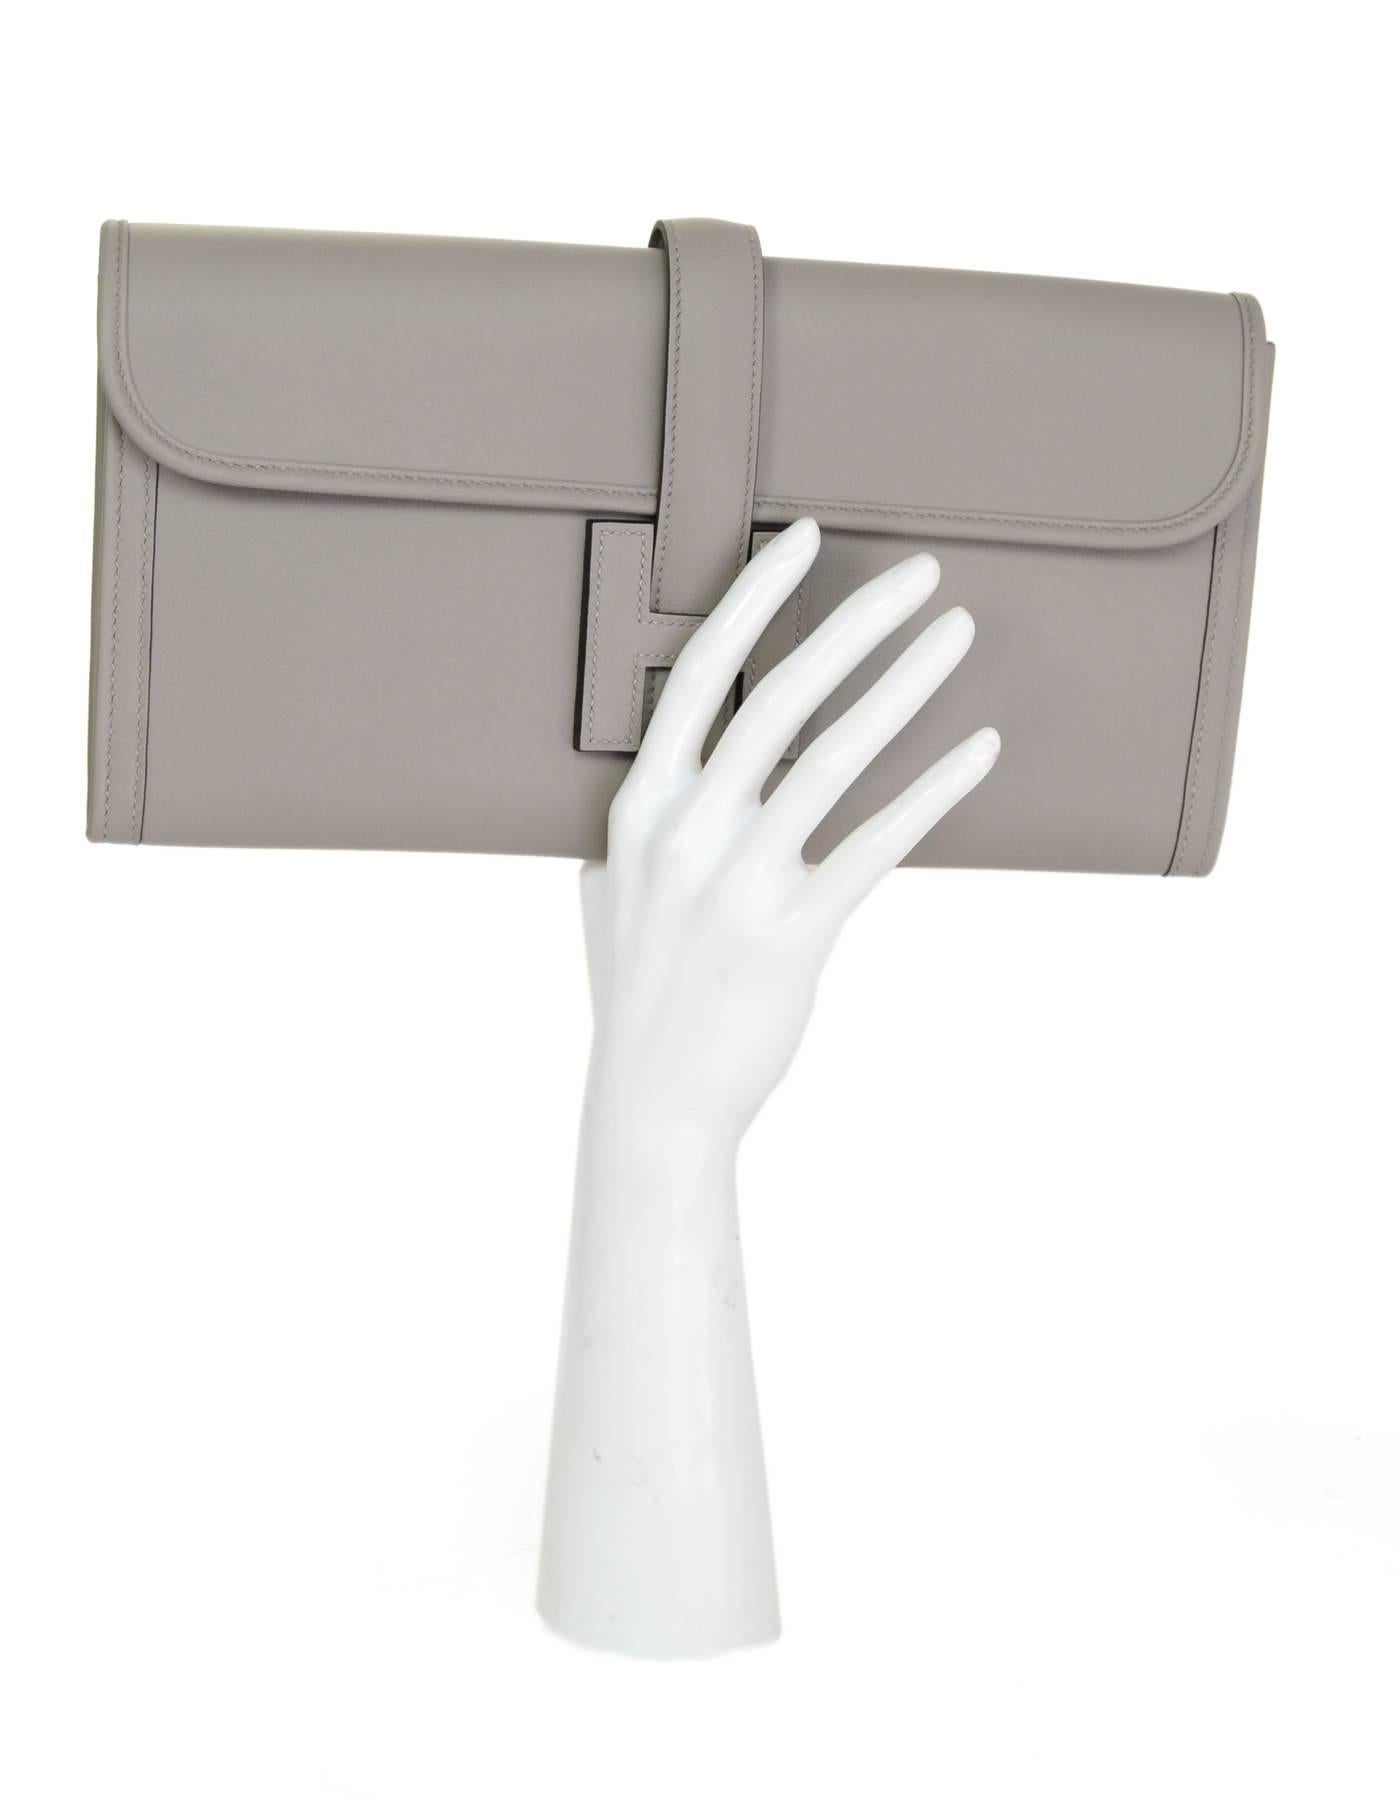 Hermes Grey Swift Leather Jige Elan 29 Clutch

Made In: France
Year of Production: 2017
Color: Grey
Hardware: None
Materials: Swift leather
Lining: Leather
Closure/opening: Flap top with strap that goes through H
Exterior Pockets: None
Interior